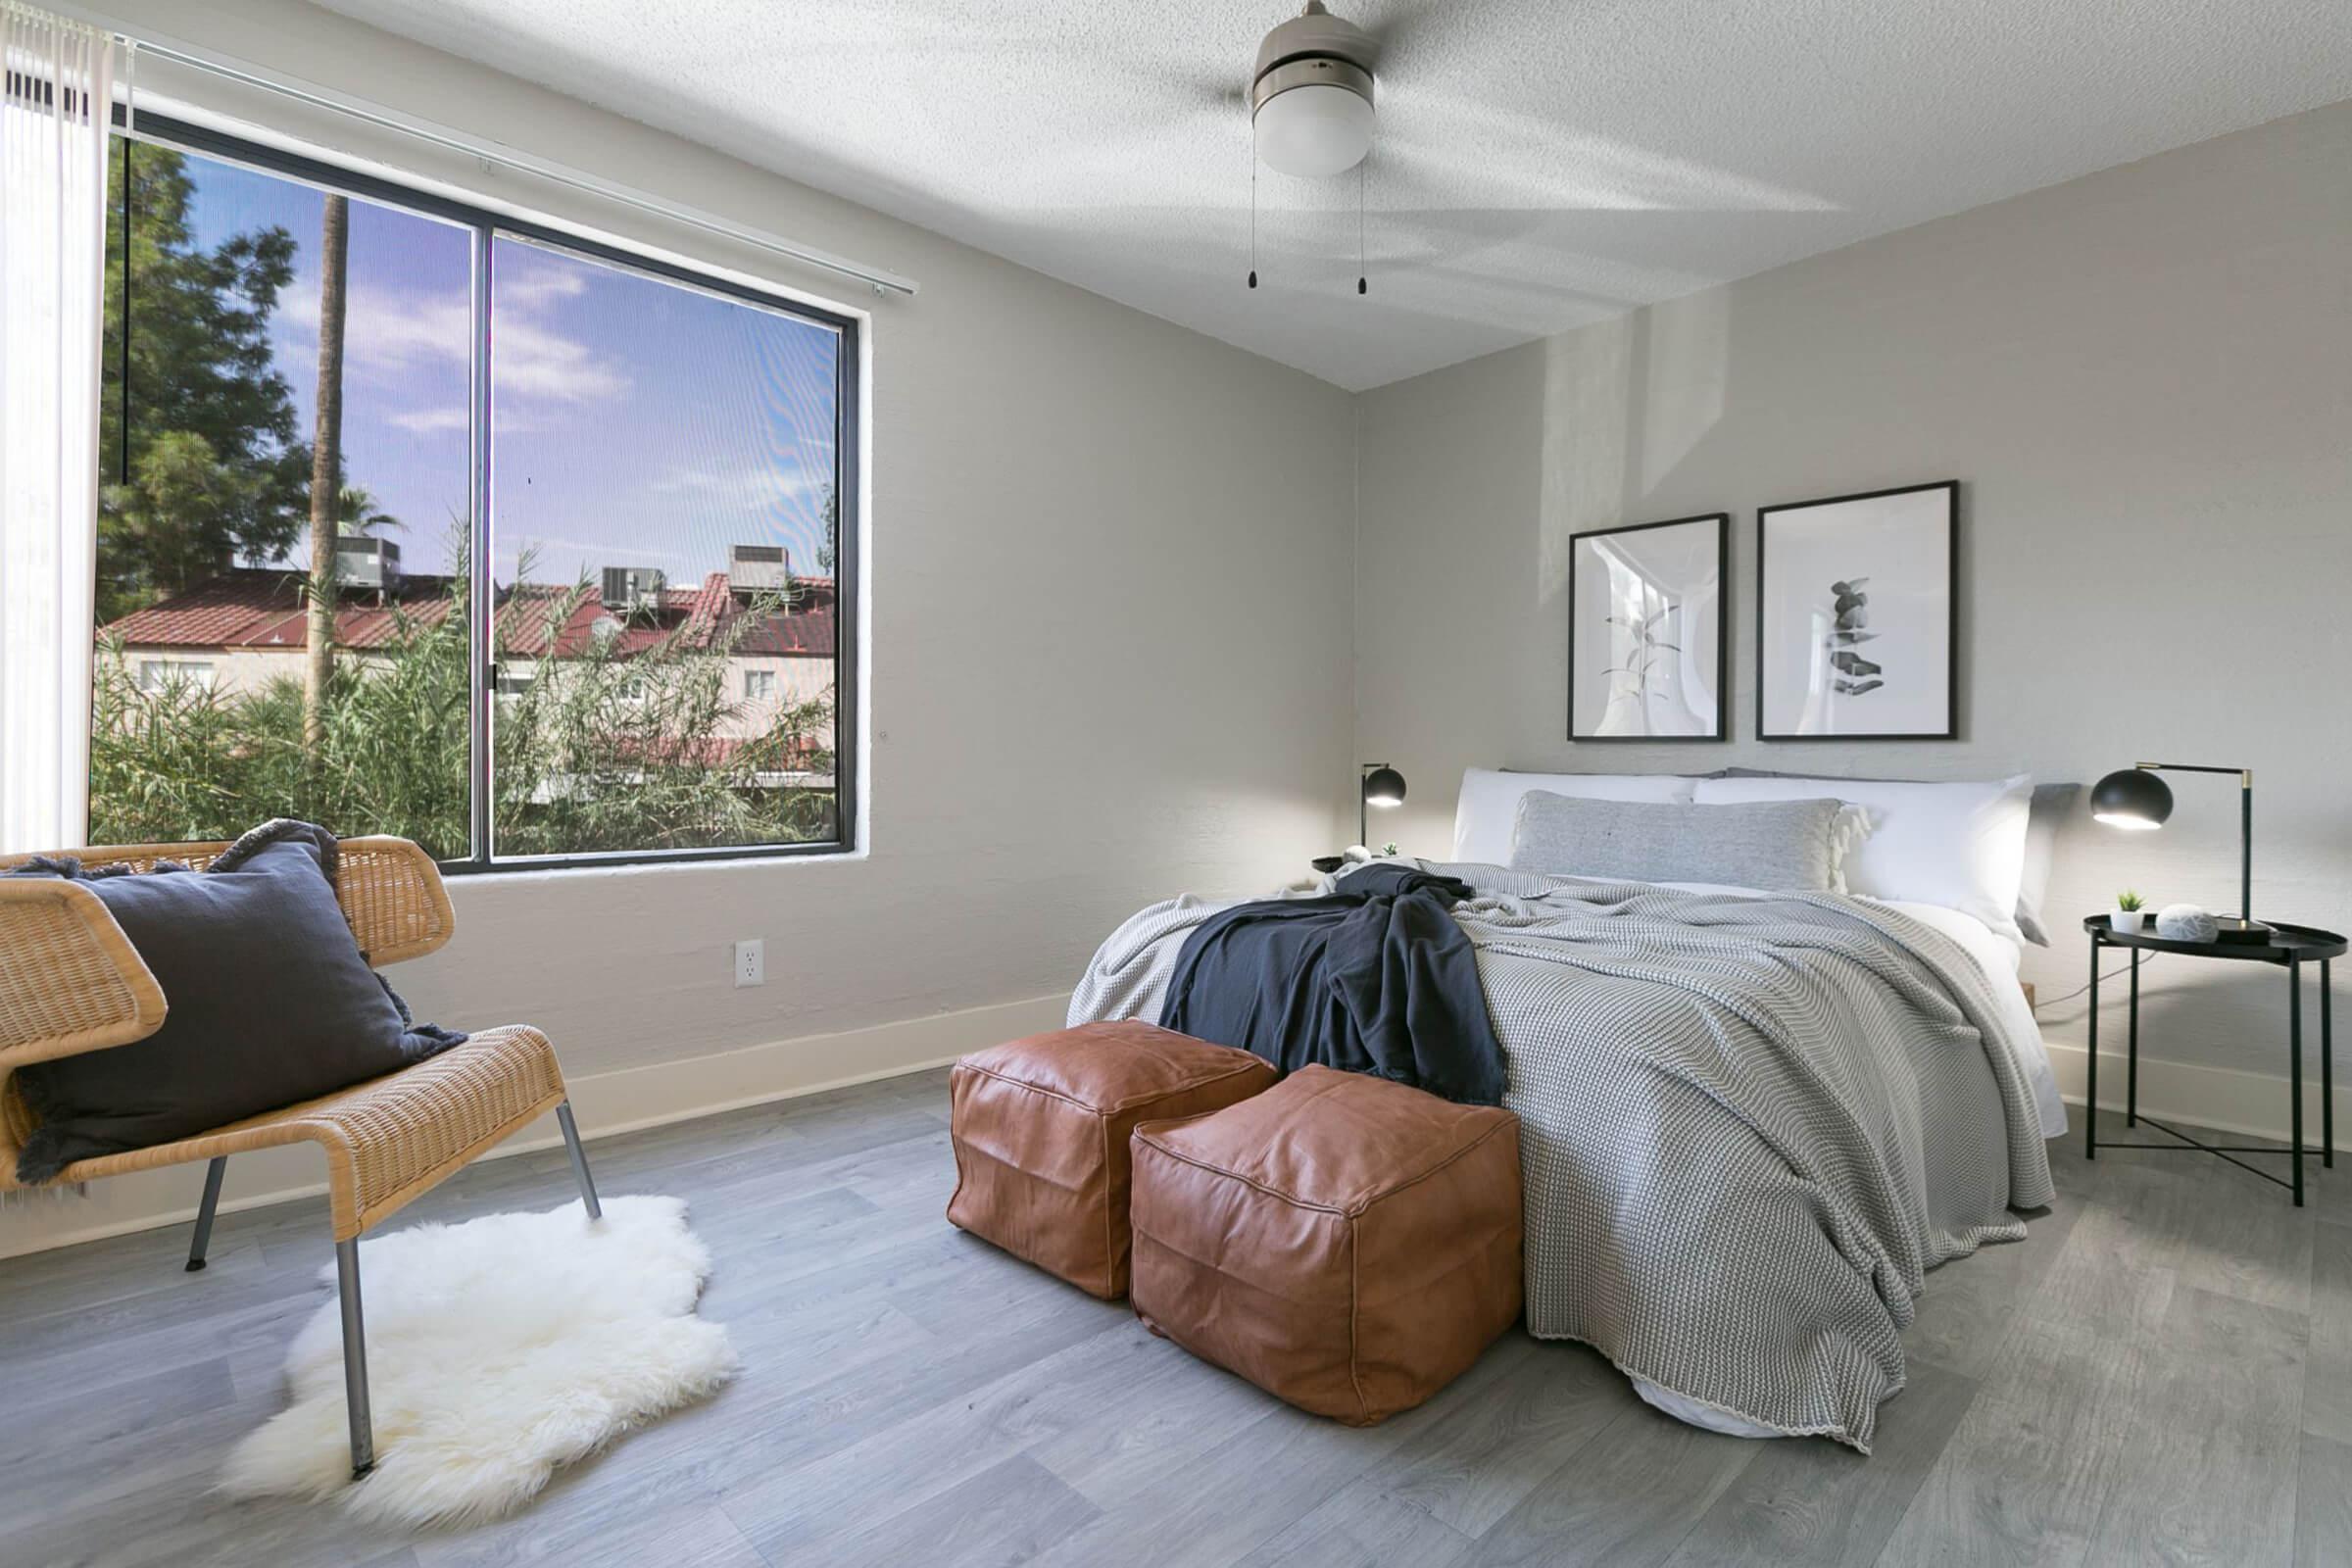 Bedroom with Large Window and Ample Natural Lighting - The Marlowe Apartments - Phoenix - Arizona